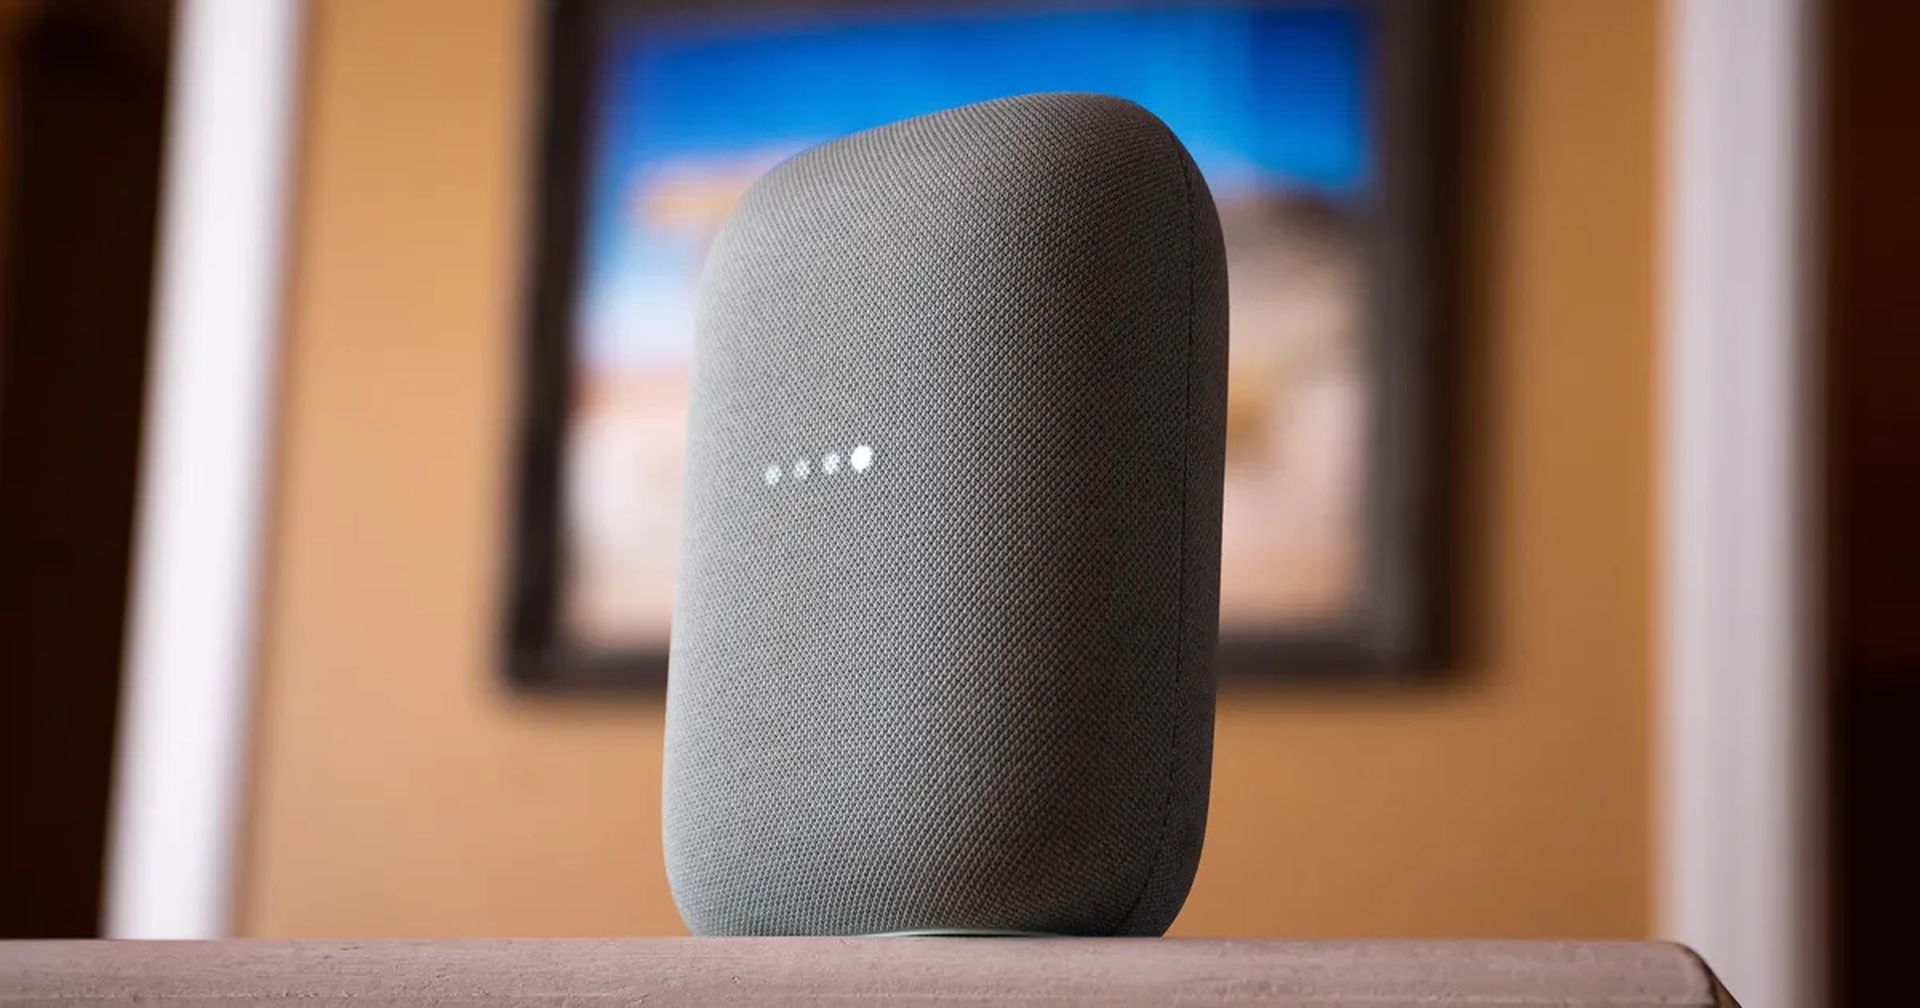 Google sues Sonos for alleged patent infringement related to their wireless charging.